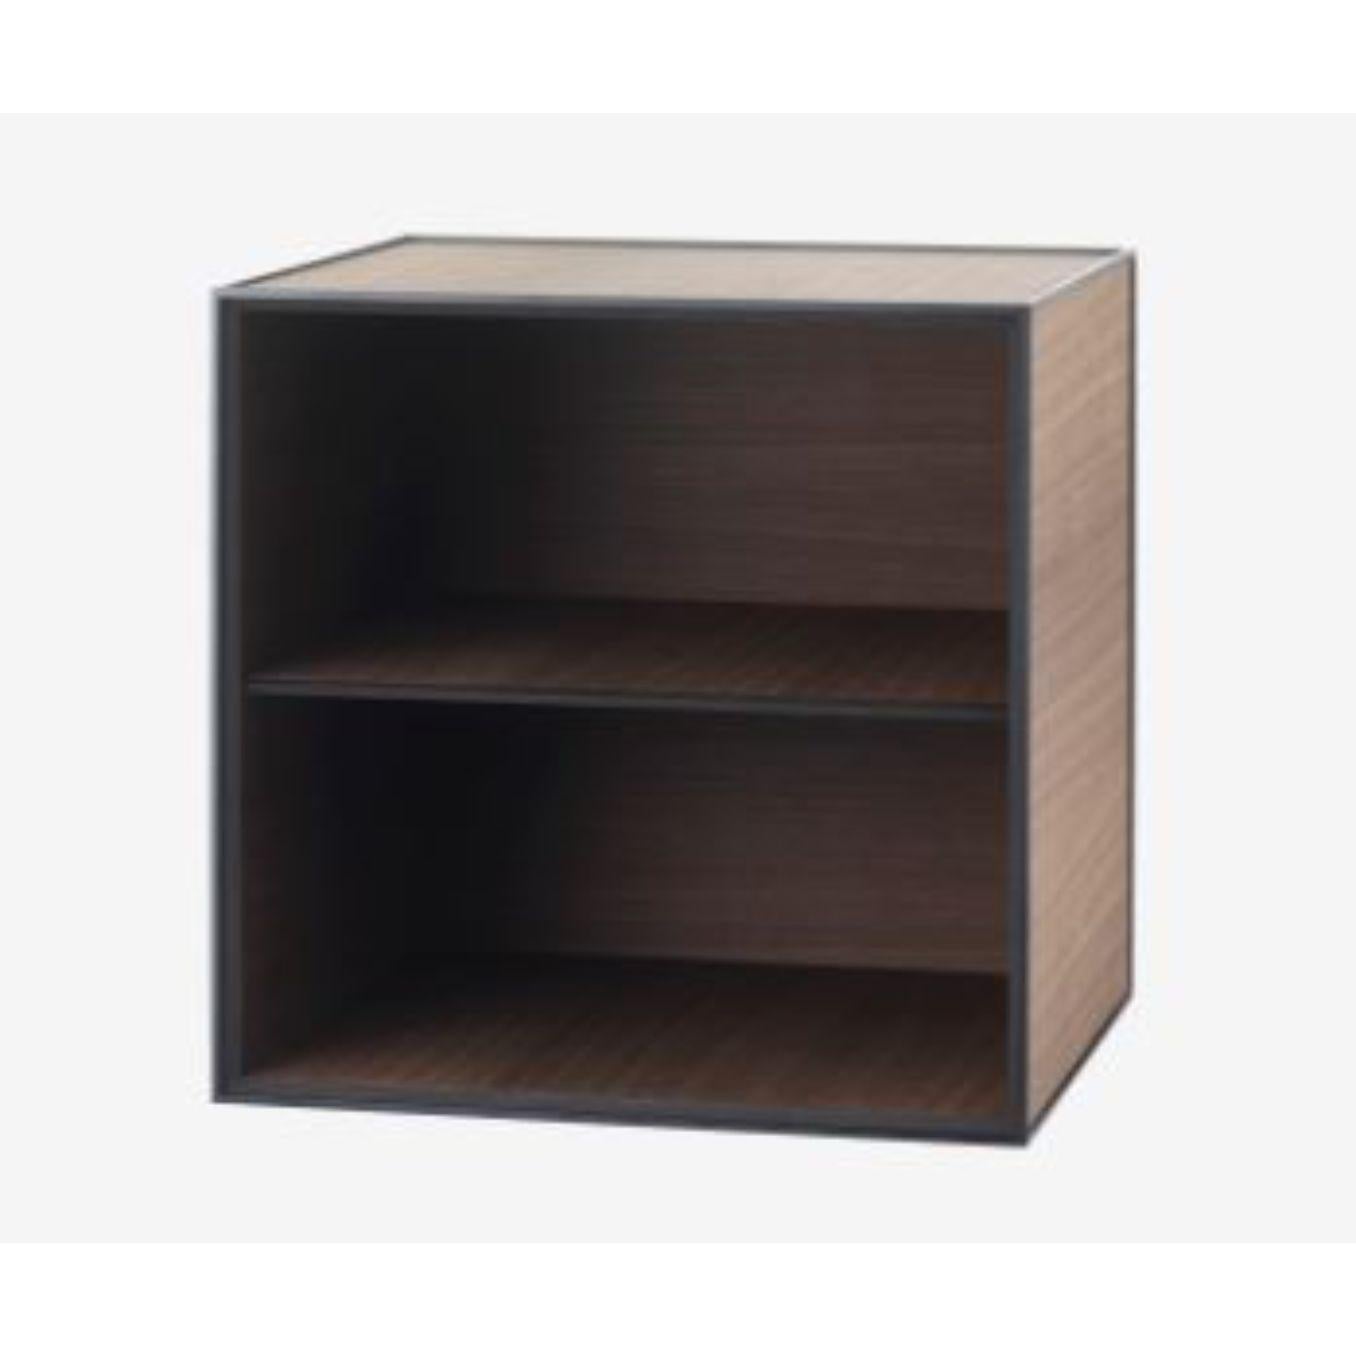 49 Smoked oak frame box with shelf by Lassen
Dimensions: D 49 x W 42 x H 49 cm 
Materials: Finér, Melamin, Melamin, Melamine, Metal, veneer, oak
Also available in different colours and dimensions.
Weight: 14 Kg


By Lassen is a Danish design